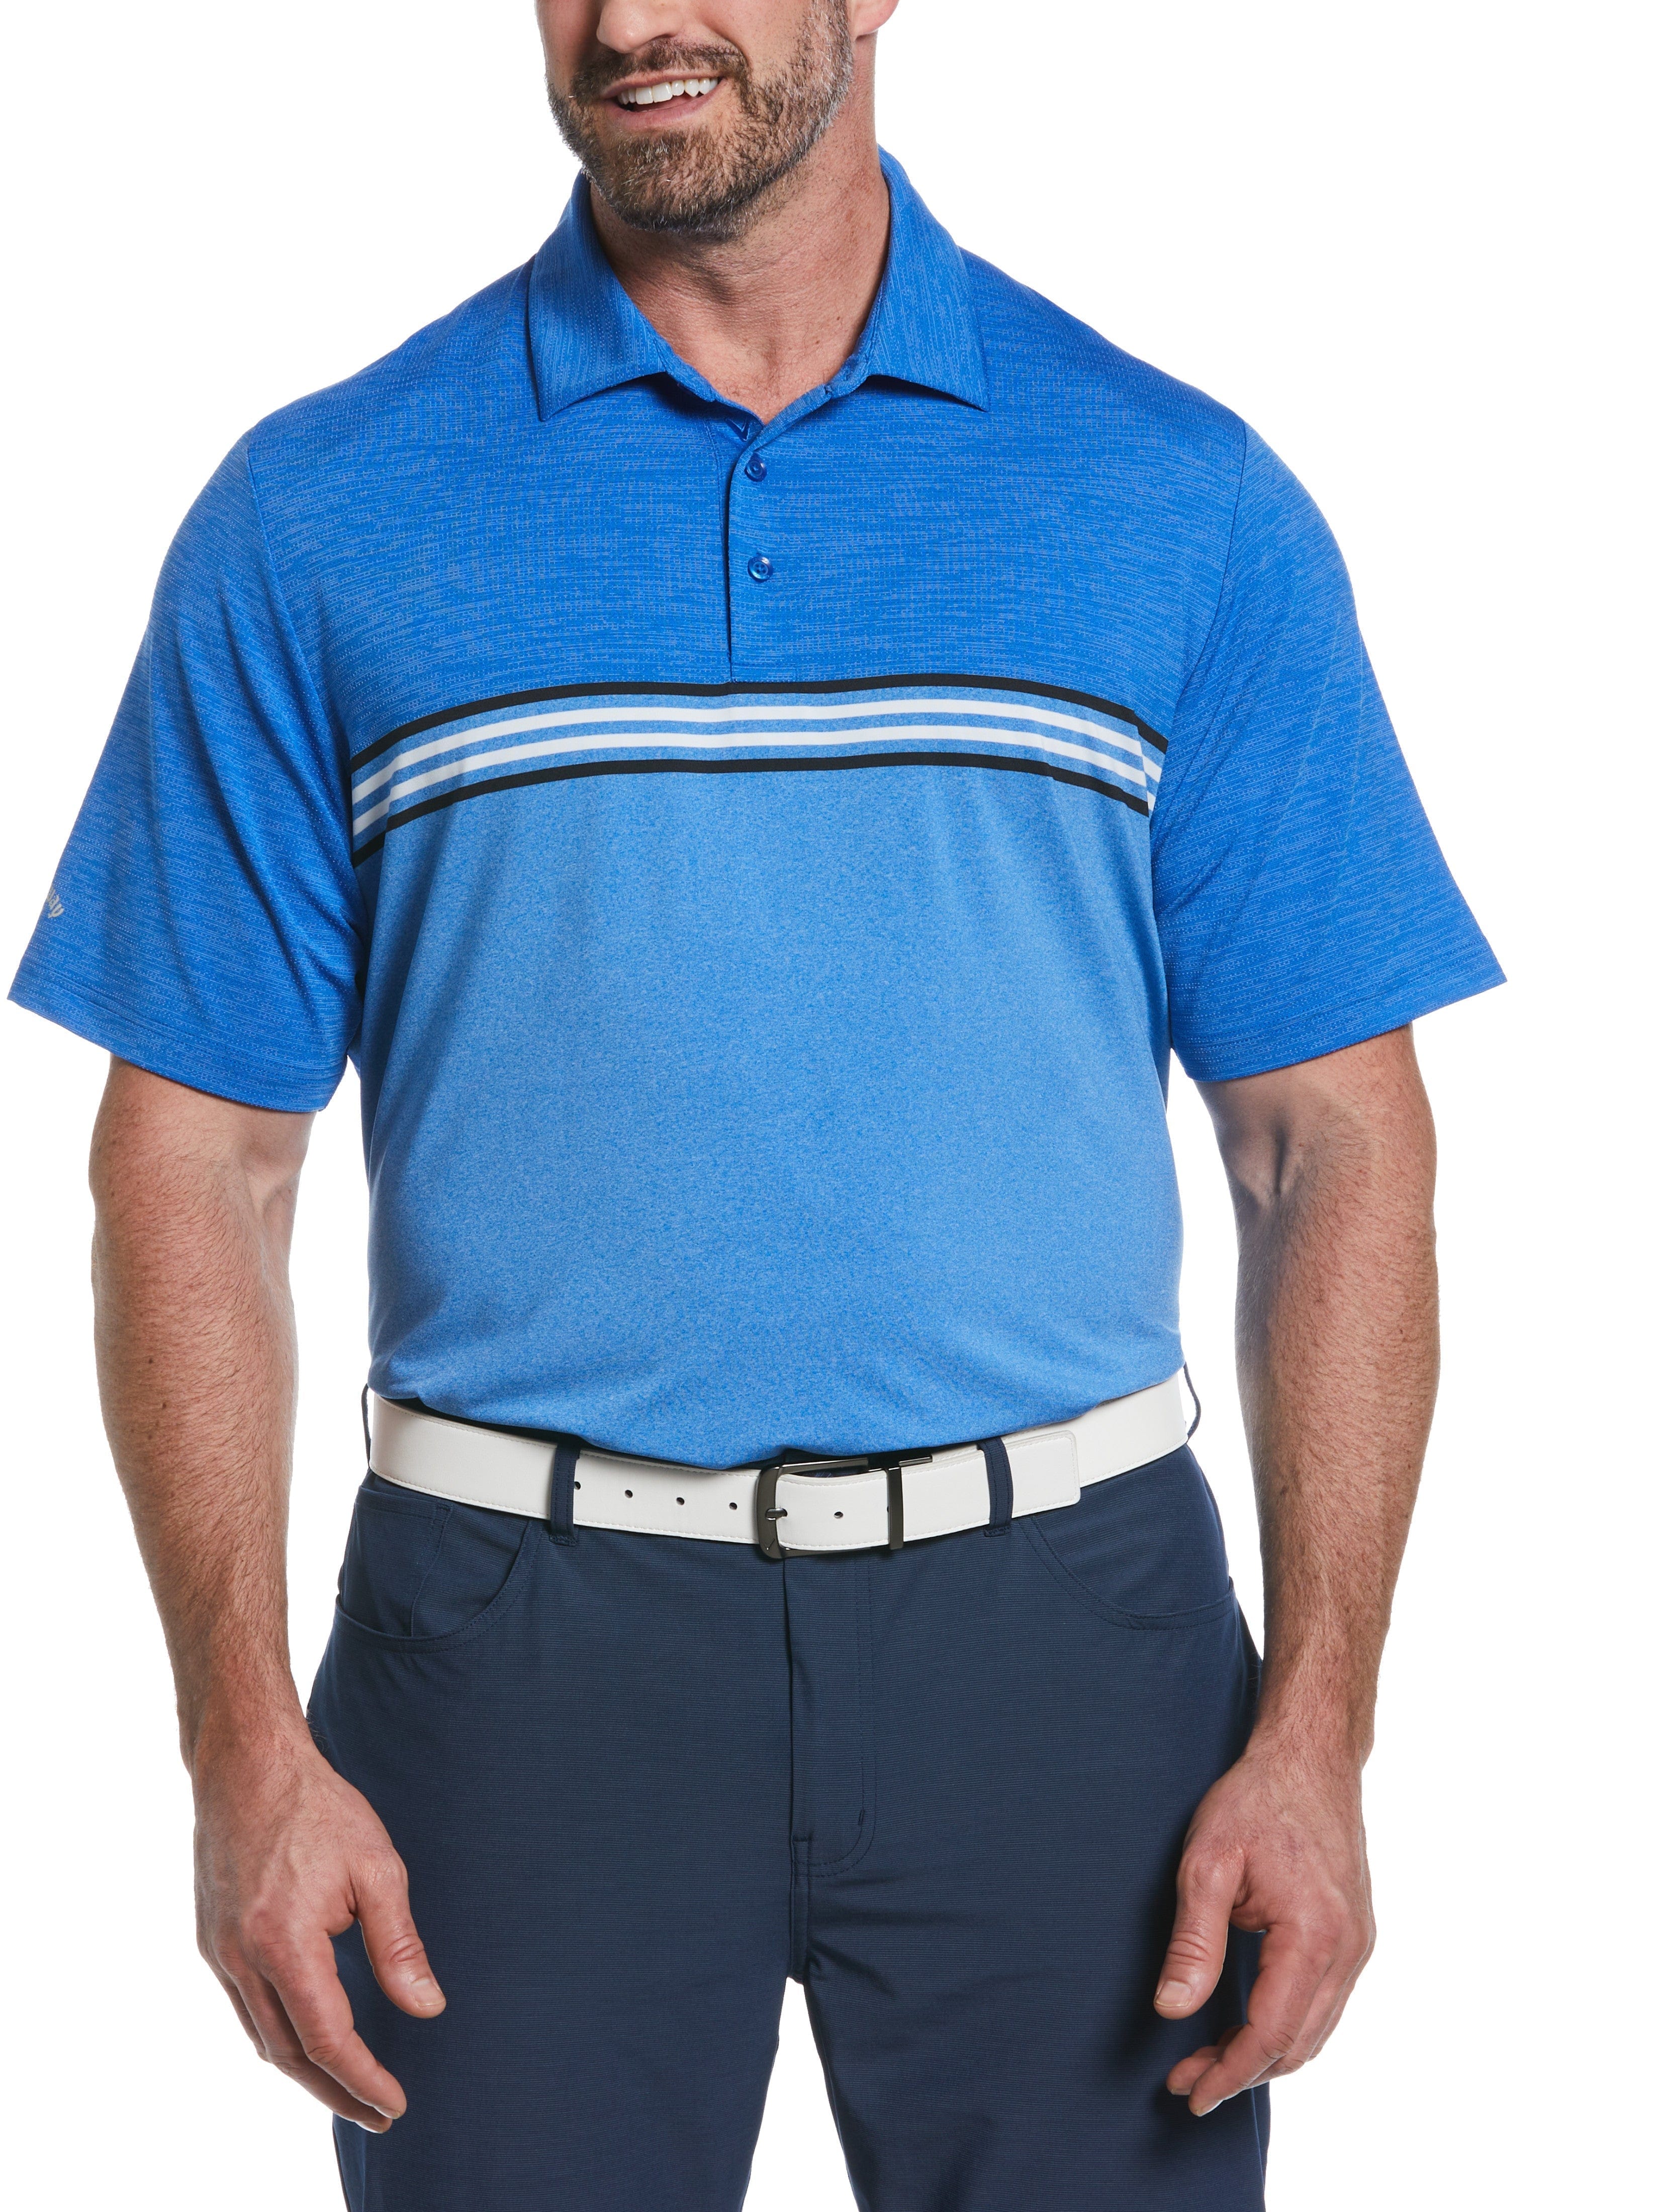 Callaway Apparel Mens Big & Tall Yarn Dyed Ventilated Jaspe Engineered Stripe Golf Polo Shirt, Size 2XLT, Magnetic Heather Blue, Polyester/Recycled P